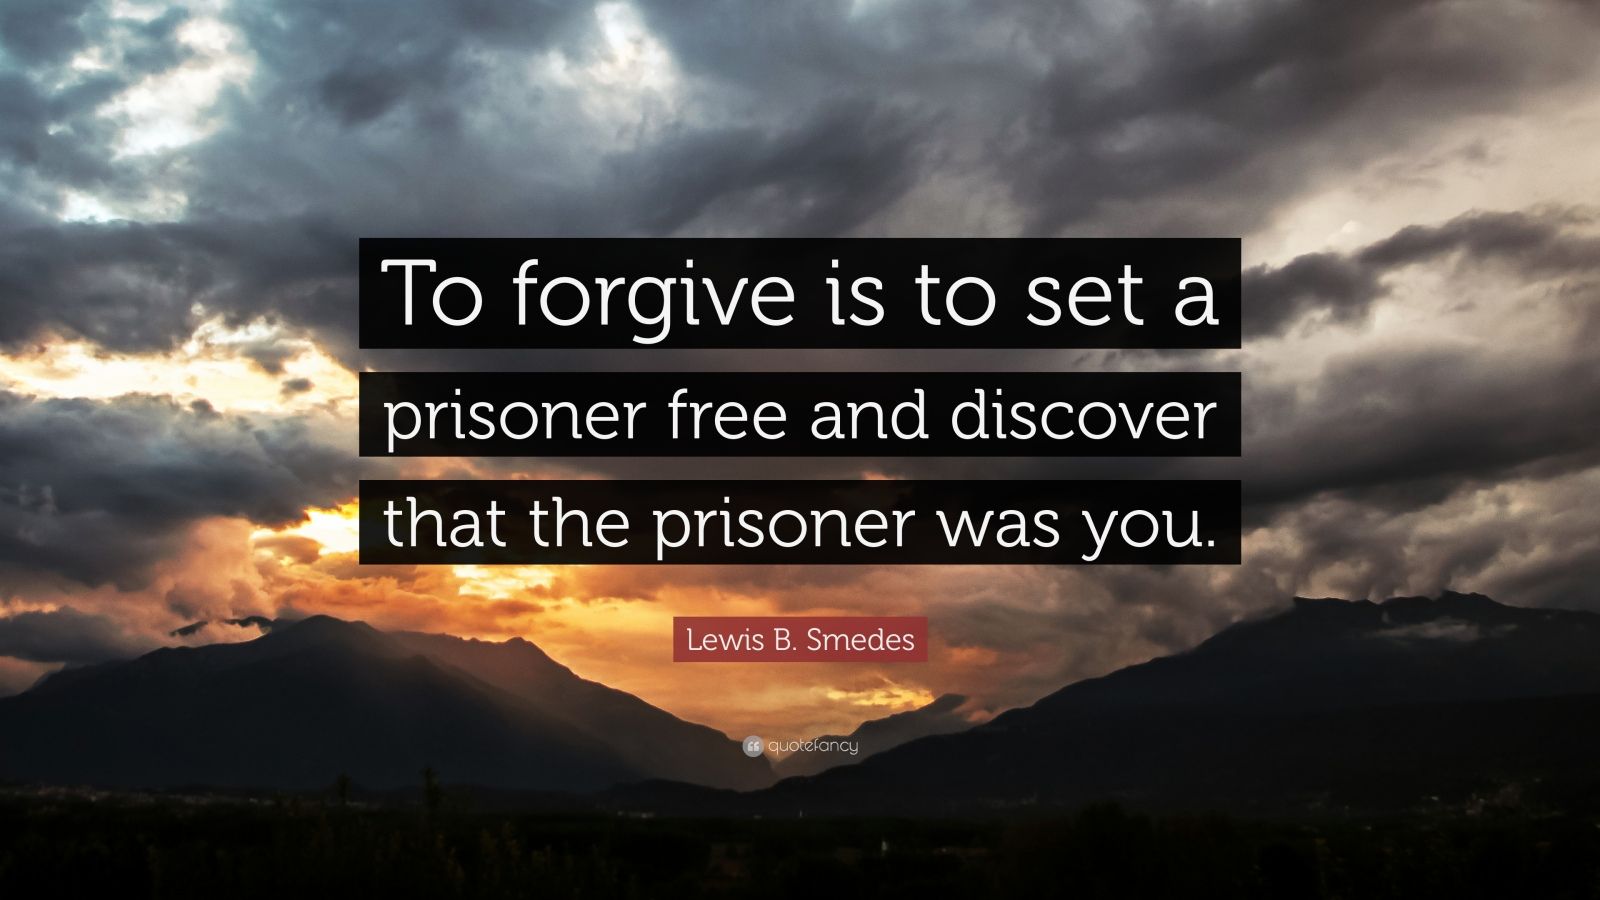 Lewis B. Smedes Quote: “To forgive is to set a prisoner free and